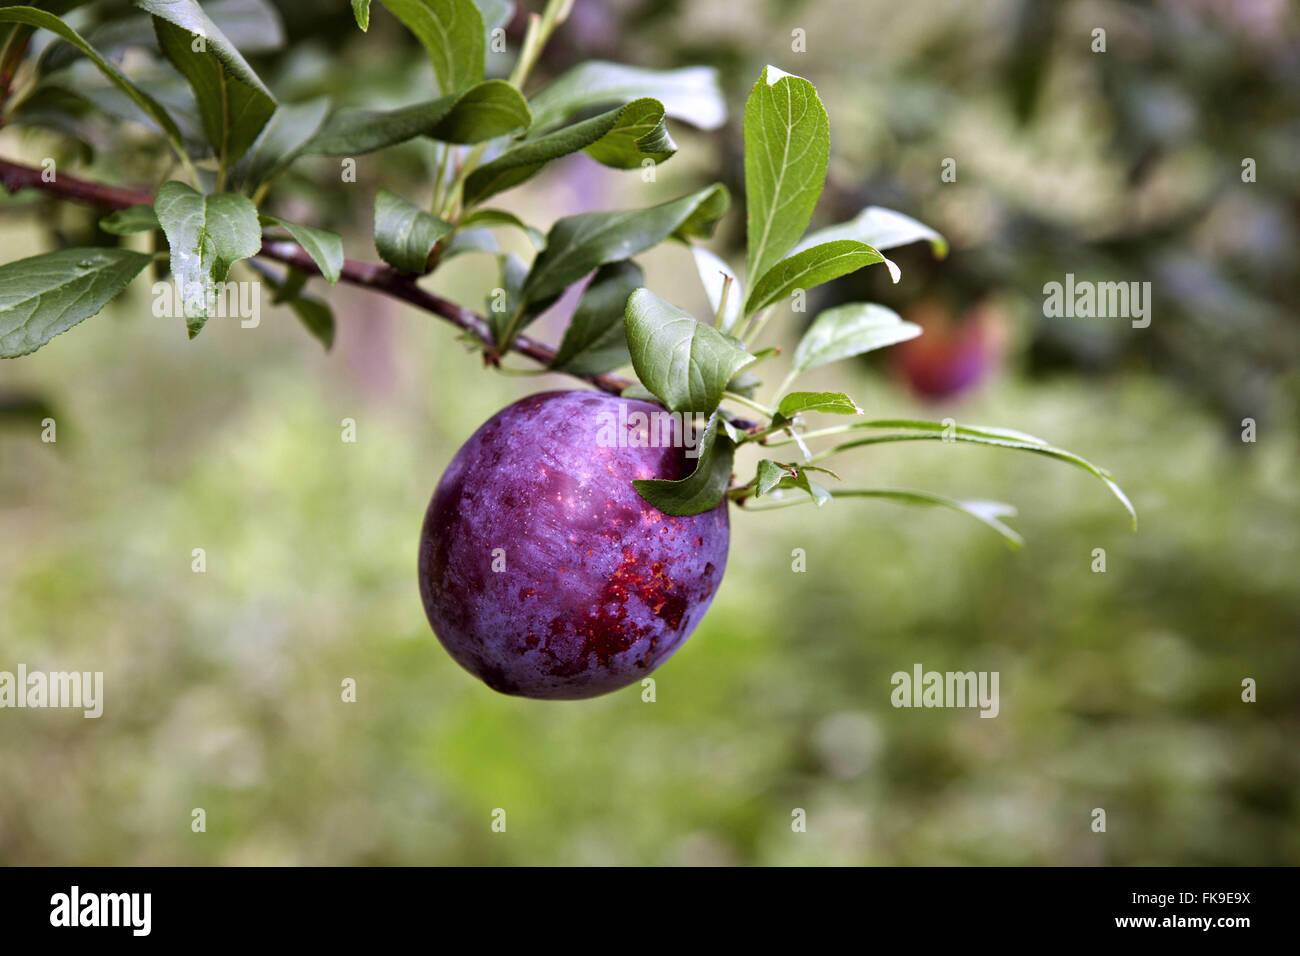 Plantation of plums in the rural town of ItaiÛpolis Stock Photo